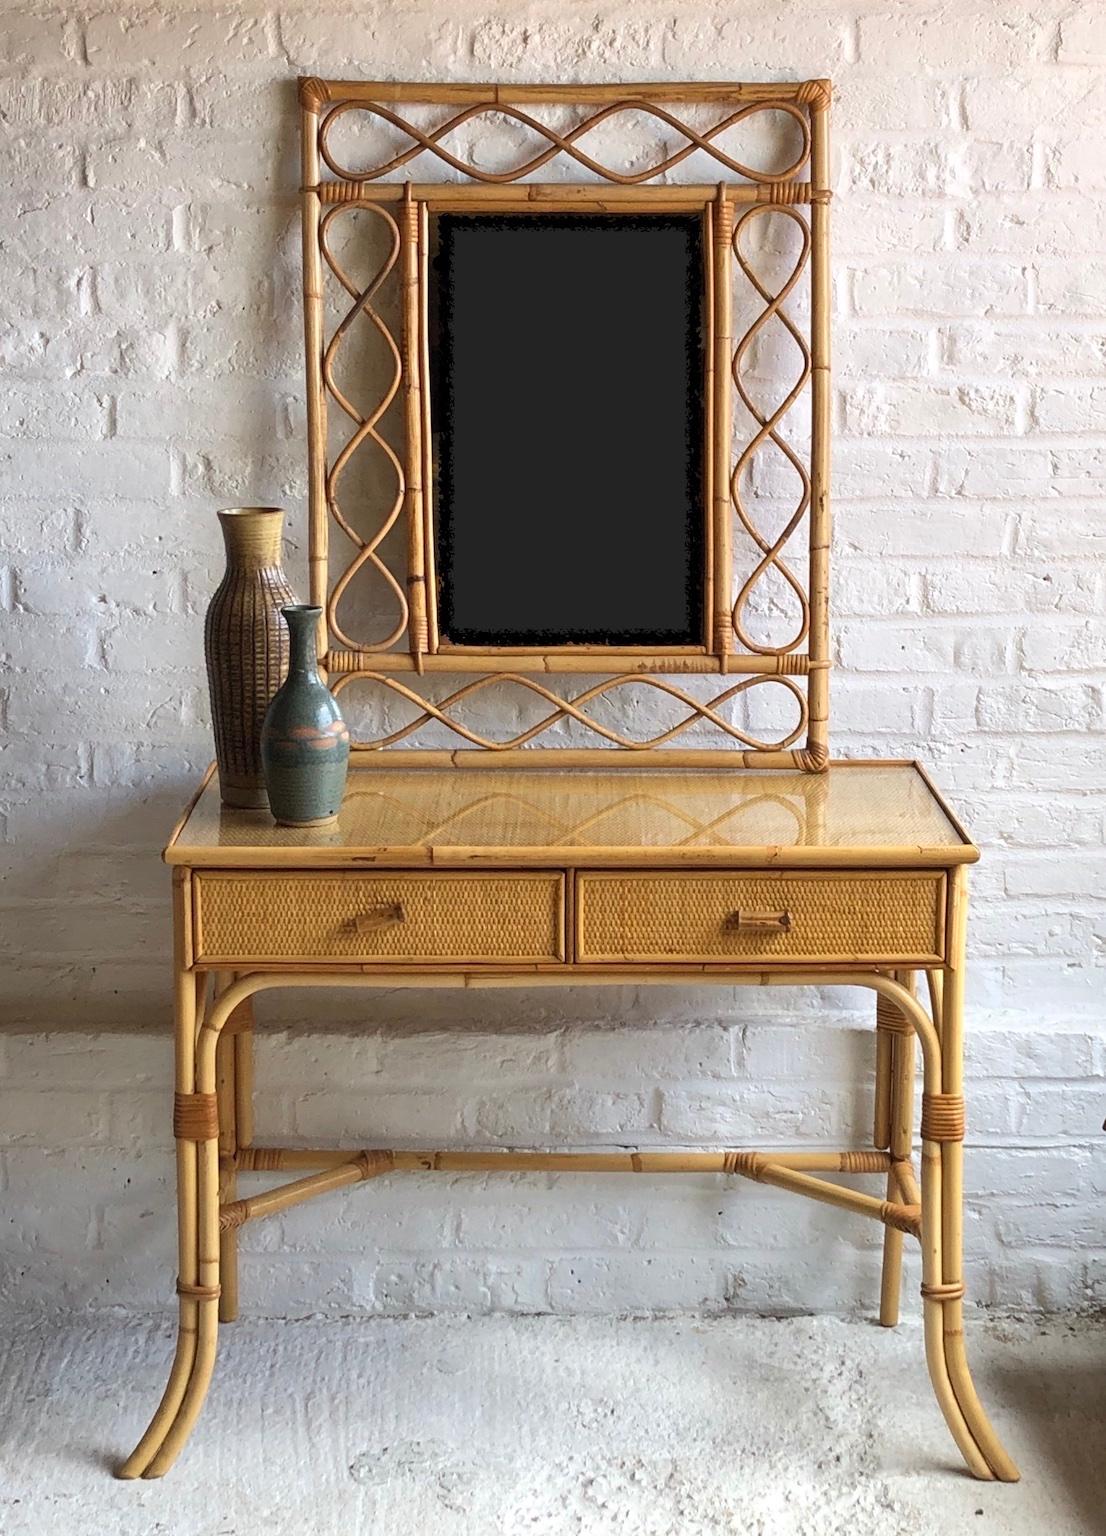 Midcentury rattan cane dressing table or small desk, Italy, 1970s

This is a stunning rattan dressing table that can also be used as a small desk, or hall table.
The quality and craftsmanship is superb. Attributed to Dal Vera

The dressing